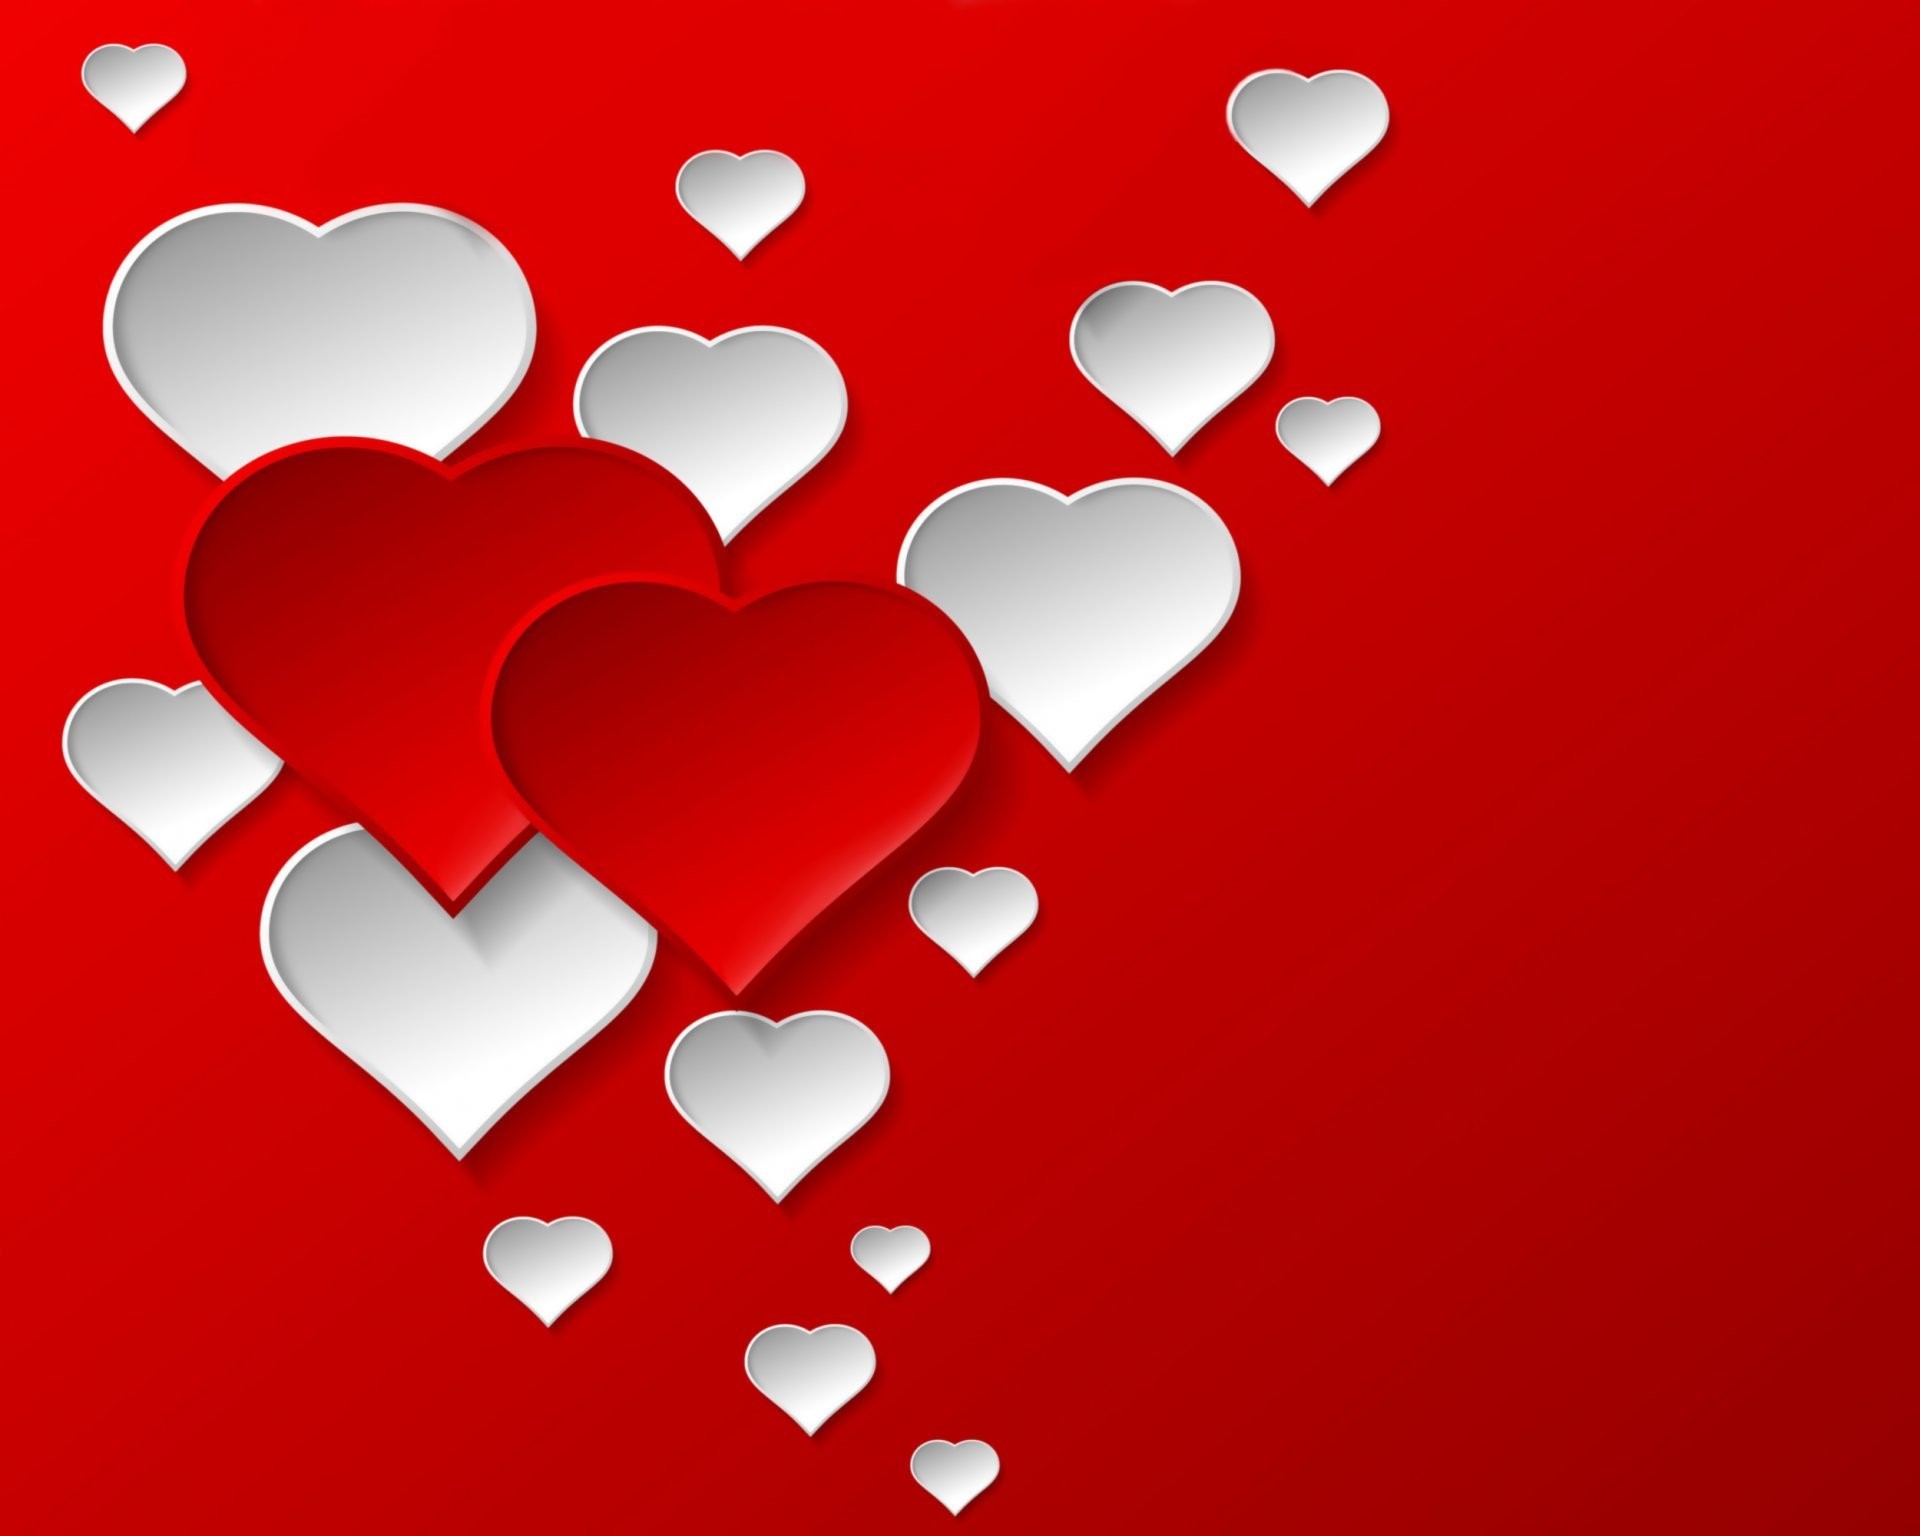 1920x1536 hearts design romantic valentines heart red love background